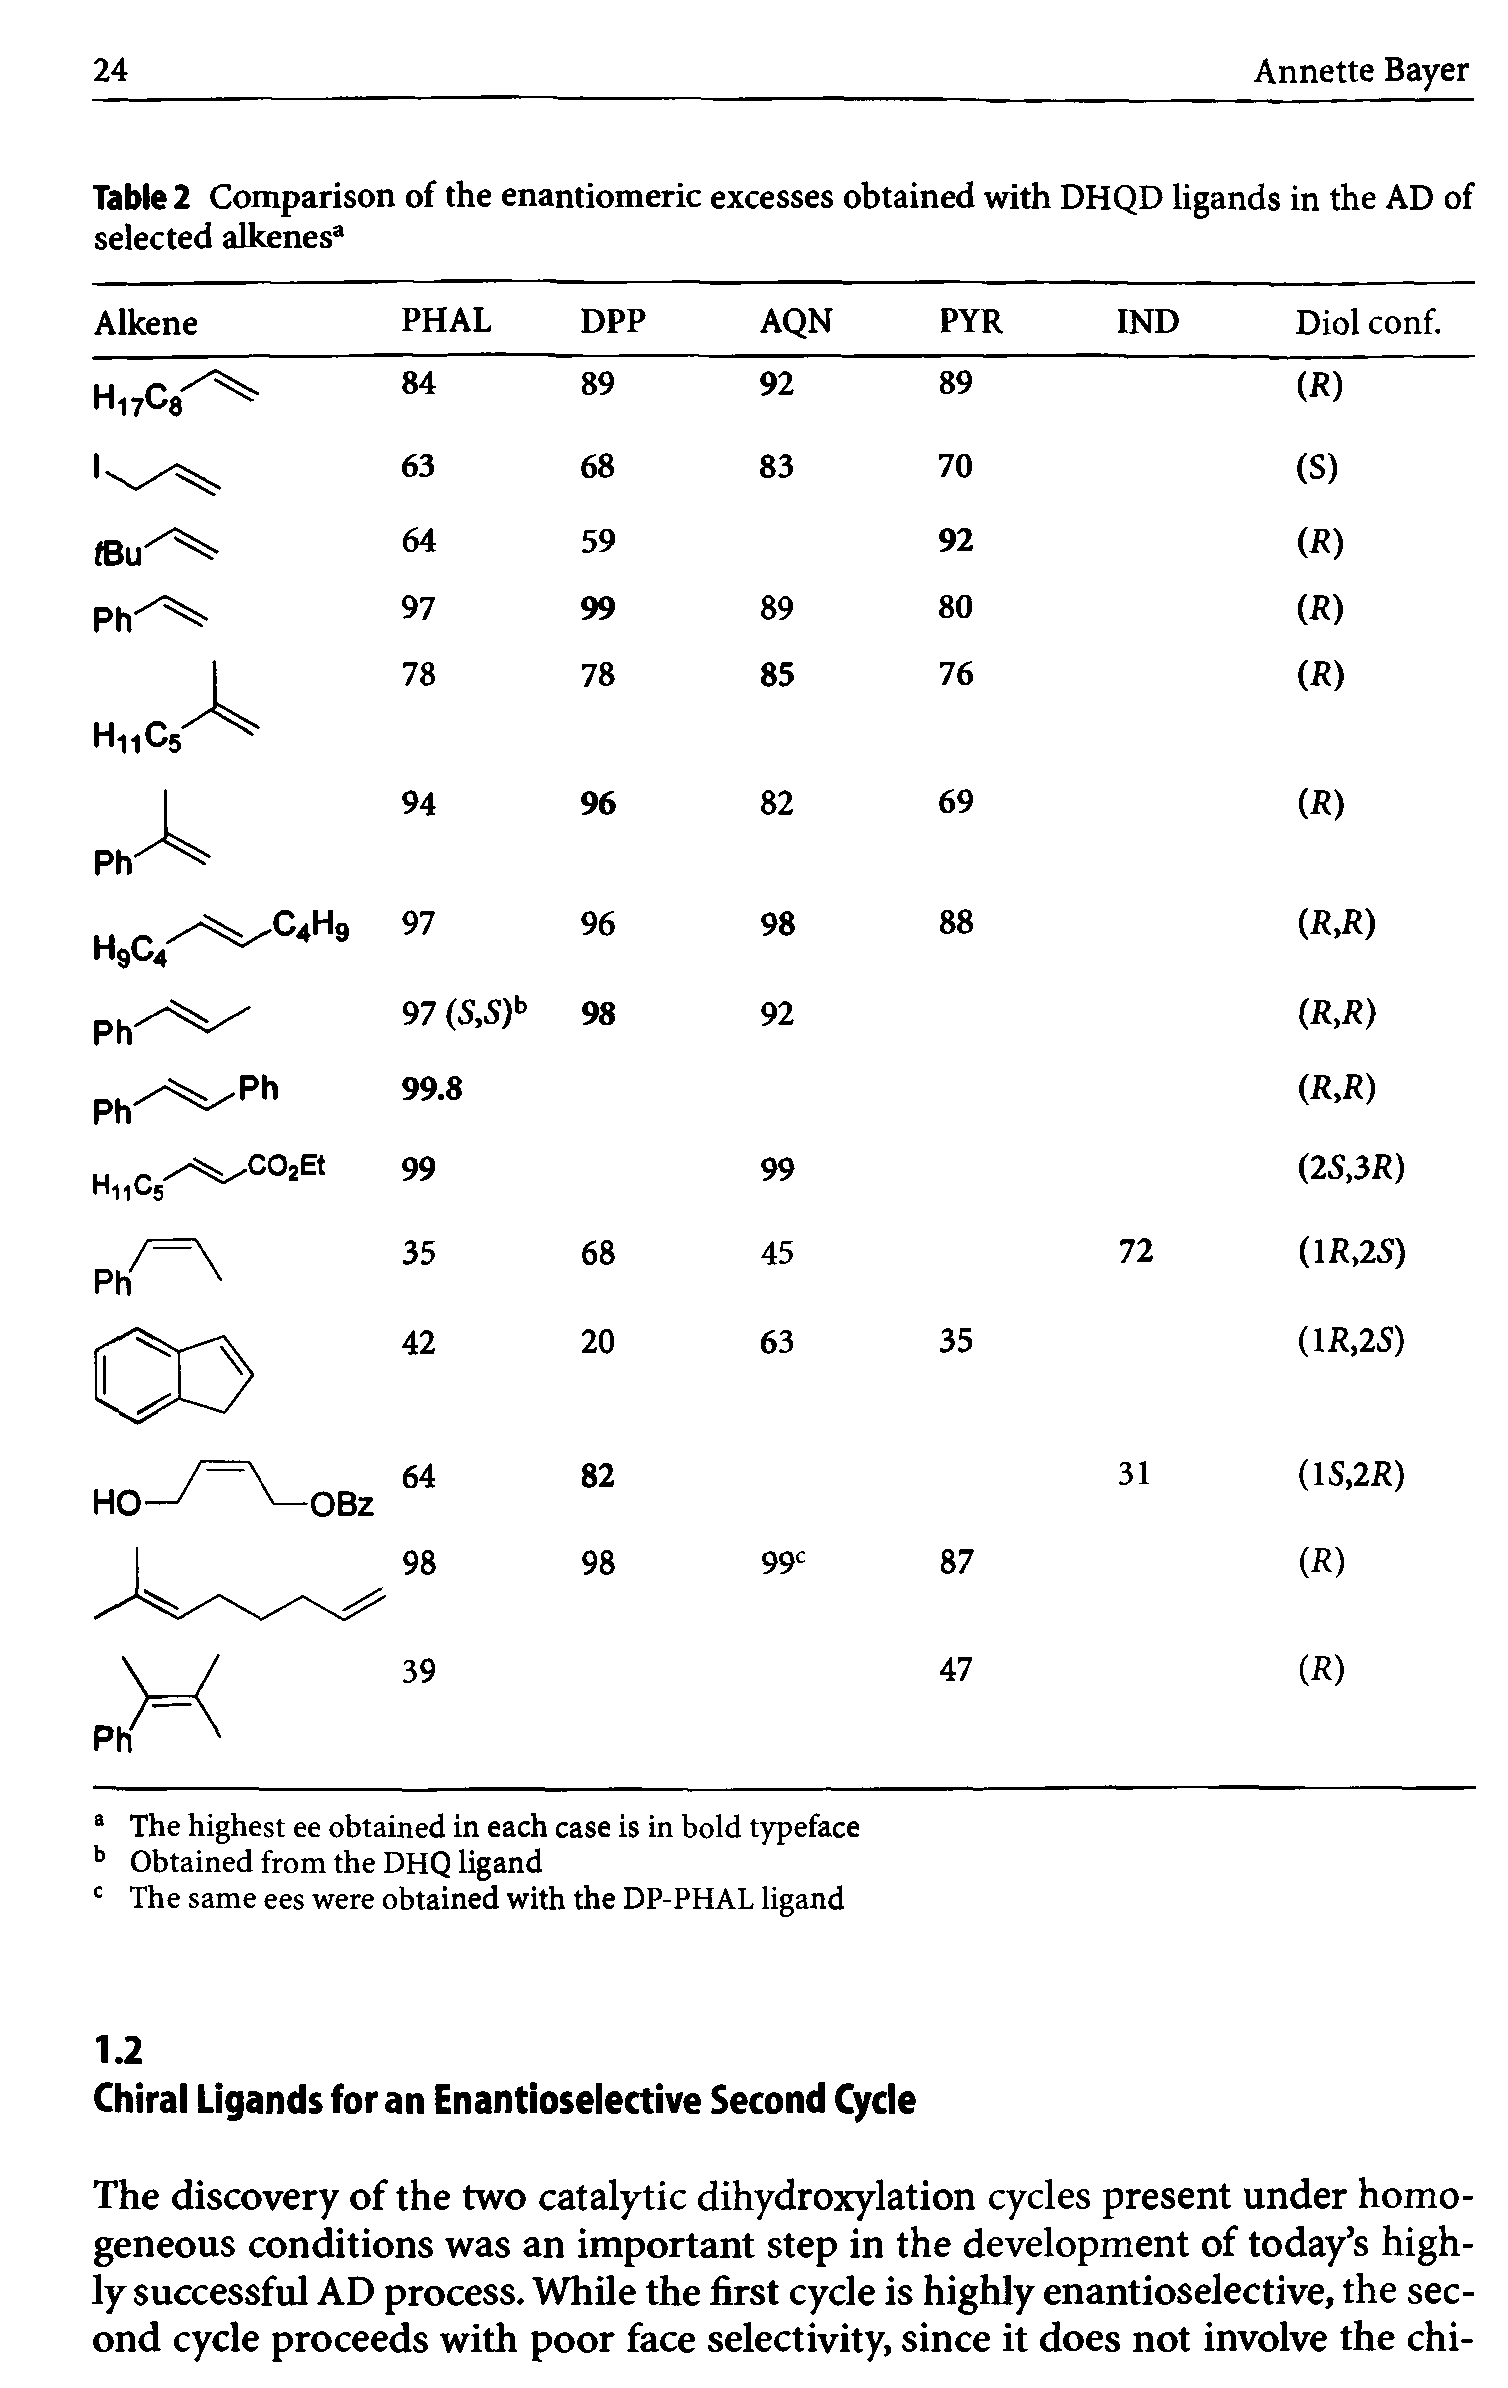 Table 2 Comparison of the enantiomeric excesses obtained with DHQD ligands in the AD of selected alkenesa...